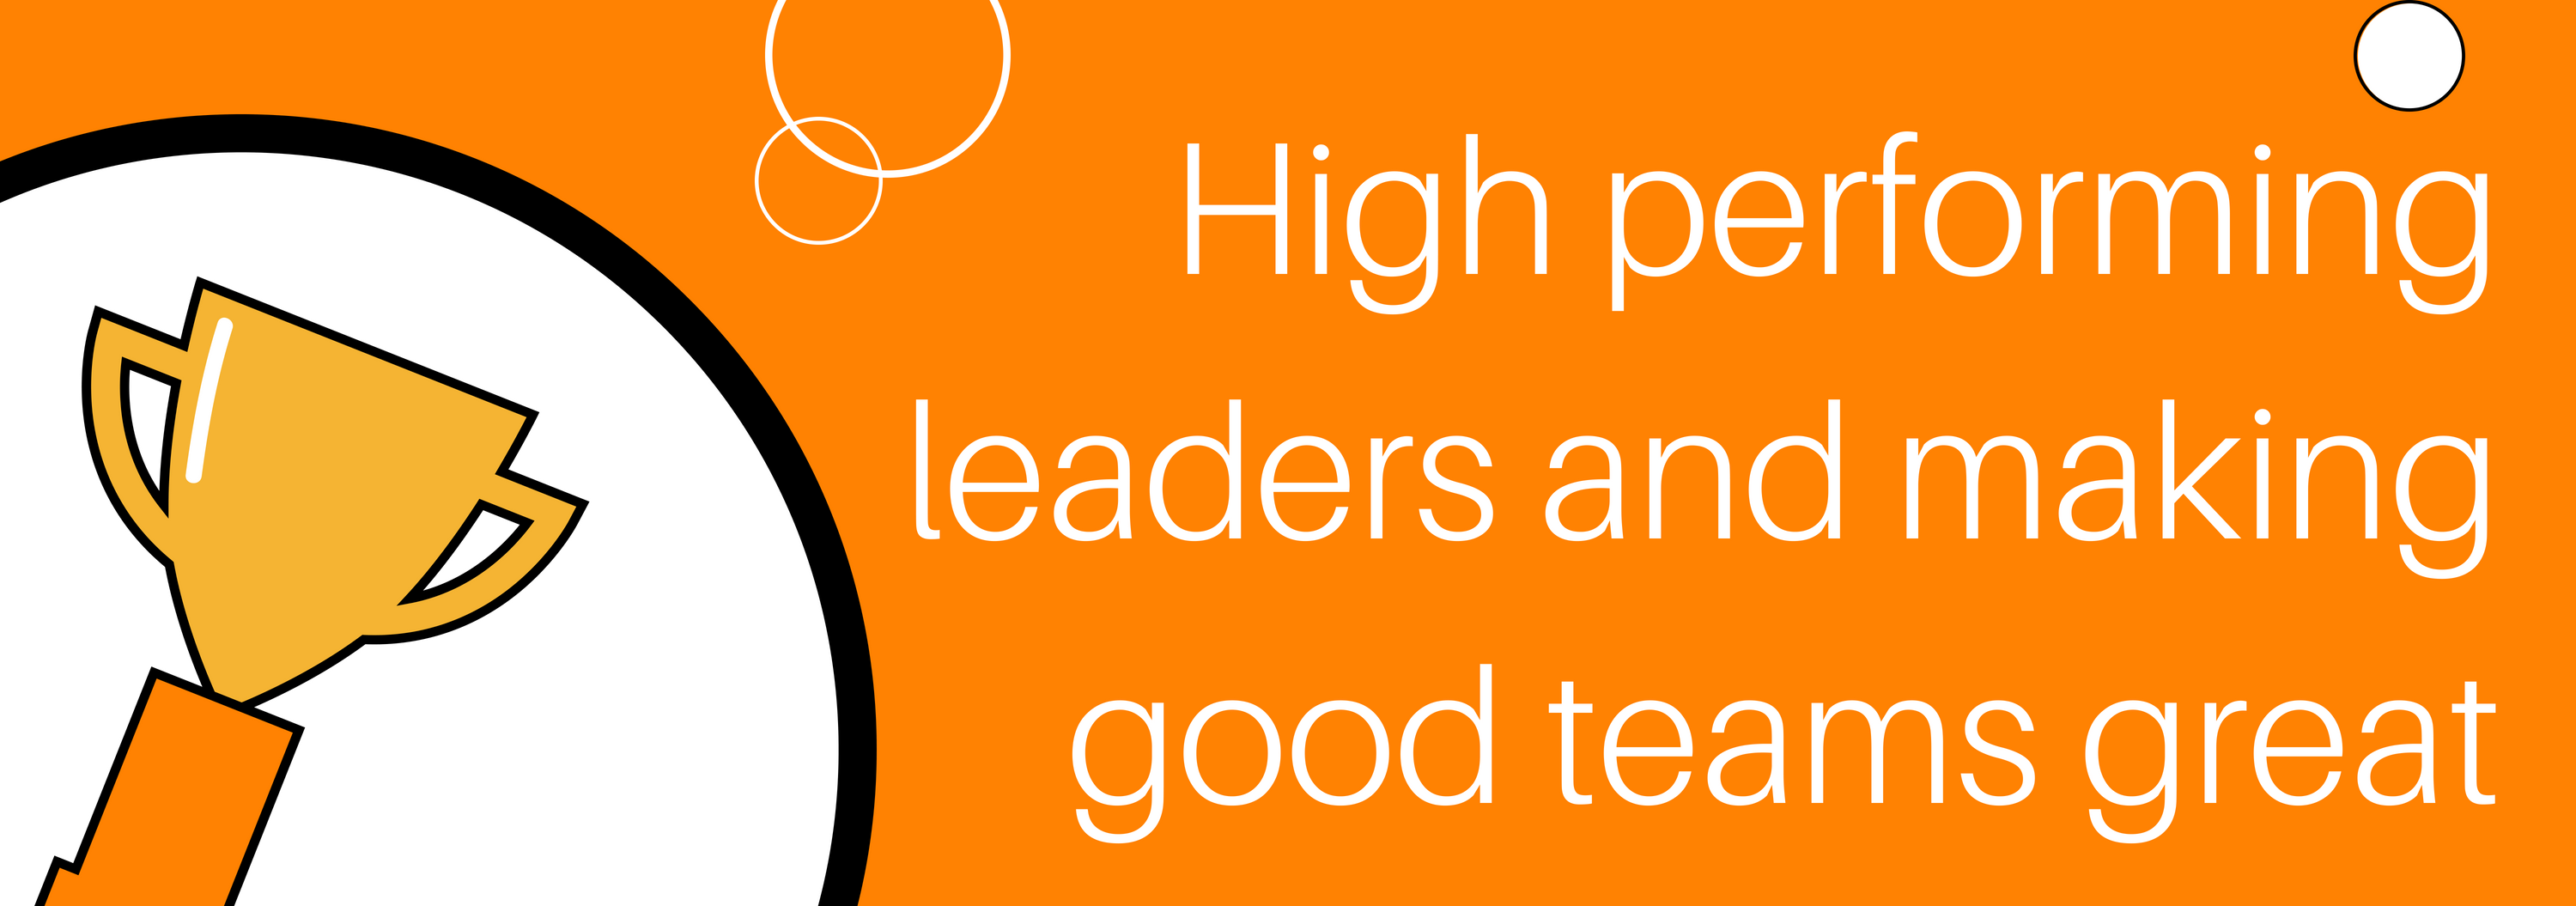 High Performing Leaders and Making Good Teams Great